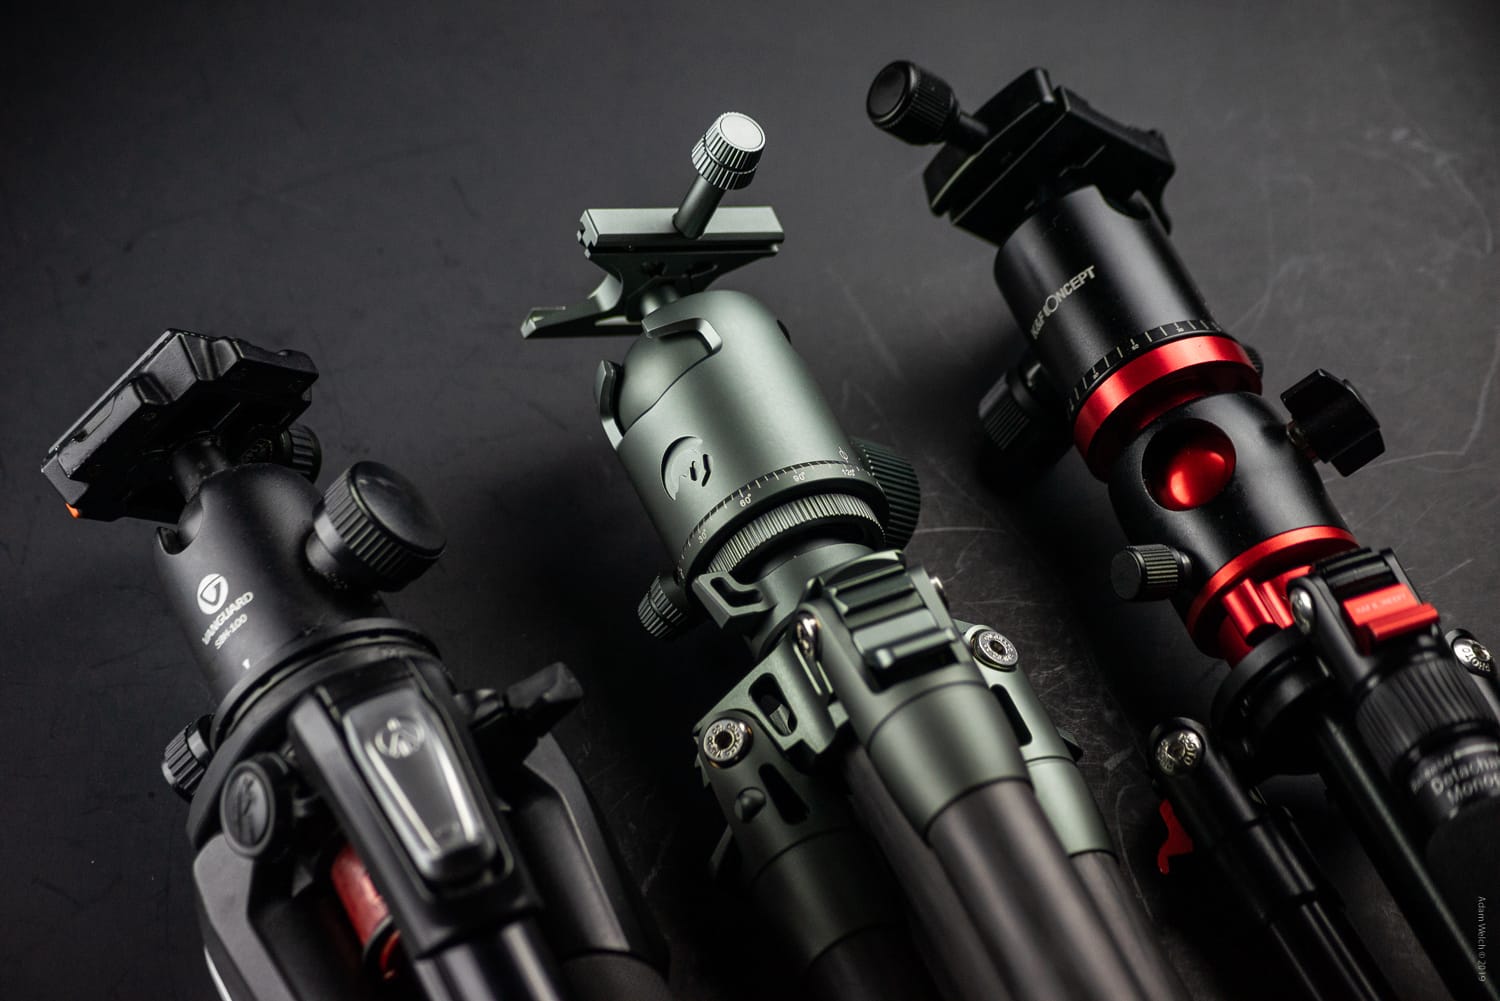 The Colorado Tripod Company's system is already a standout